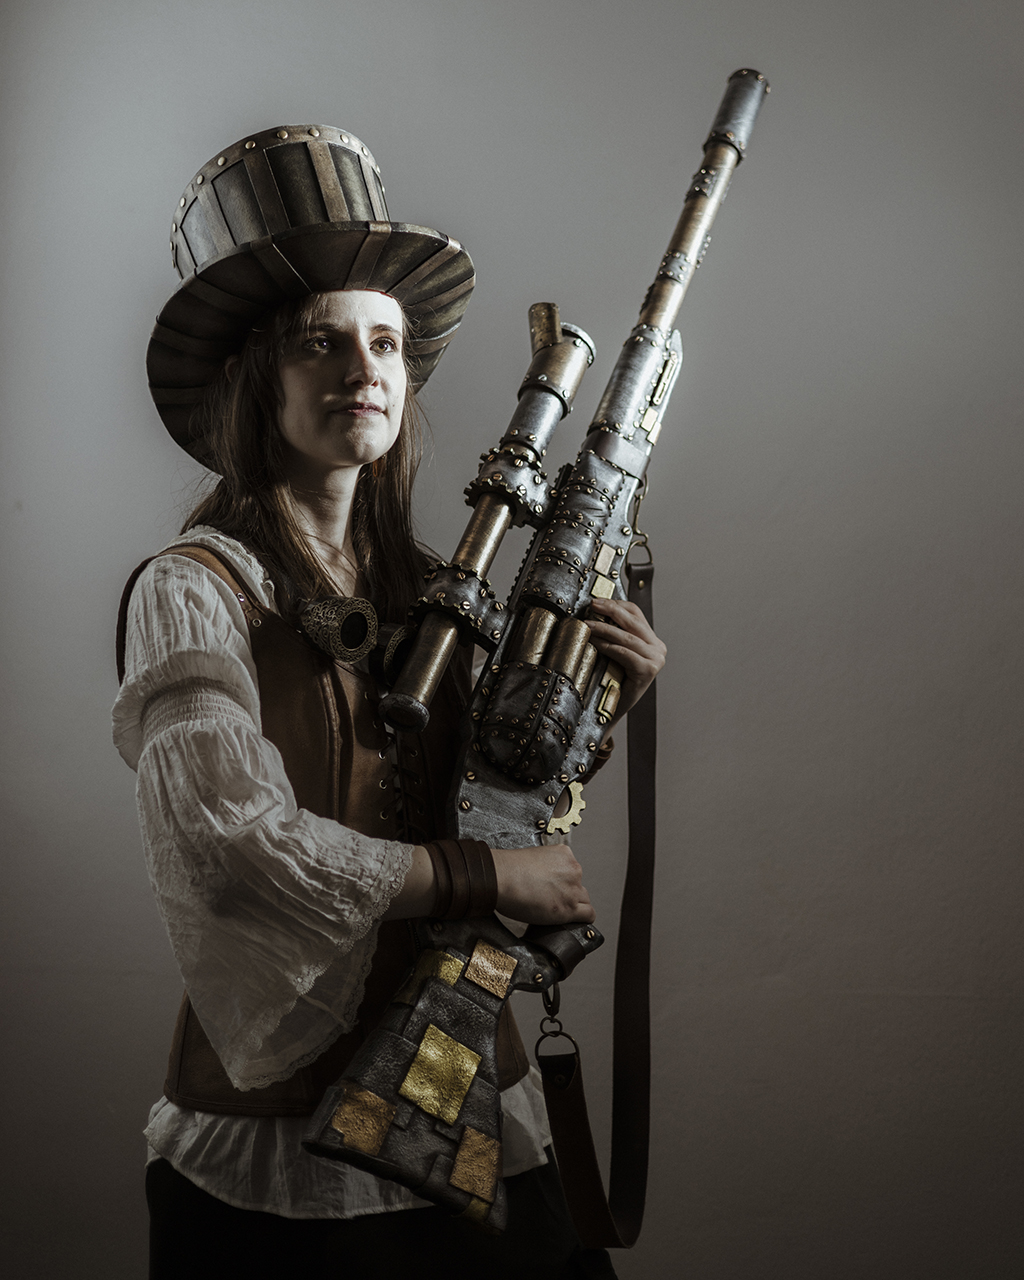 South African cosplayer Danika Saayman, 23, poses for a portrait while dressed as a character from Steampunk, a subgenre of science fiction.